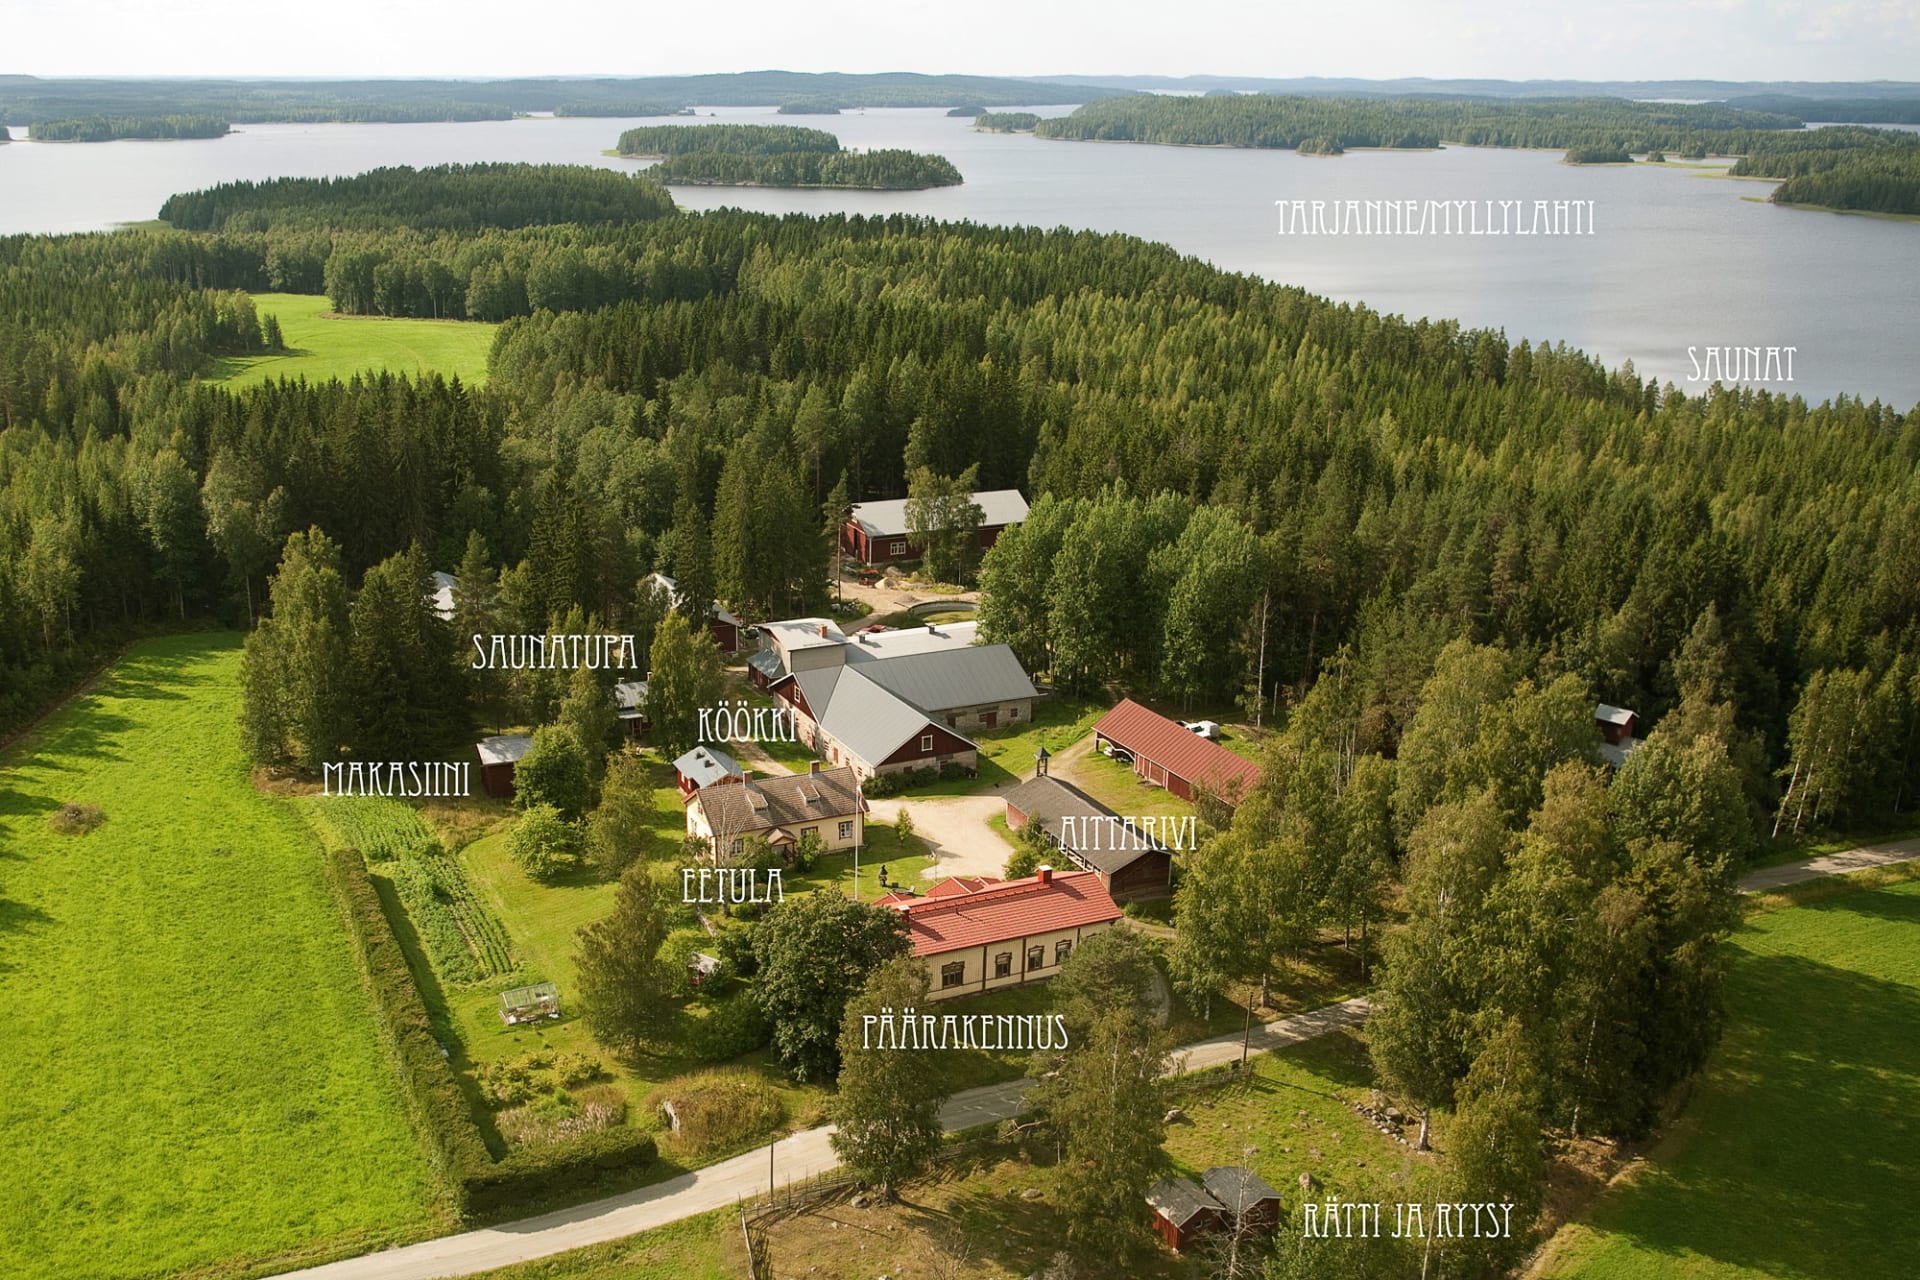 The aerial view of the Ylä-Tuuhonen Farm shows the farm's buildings, fields, forest and Lake Tarjanne.